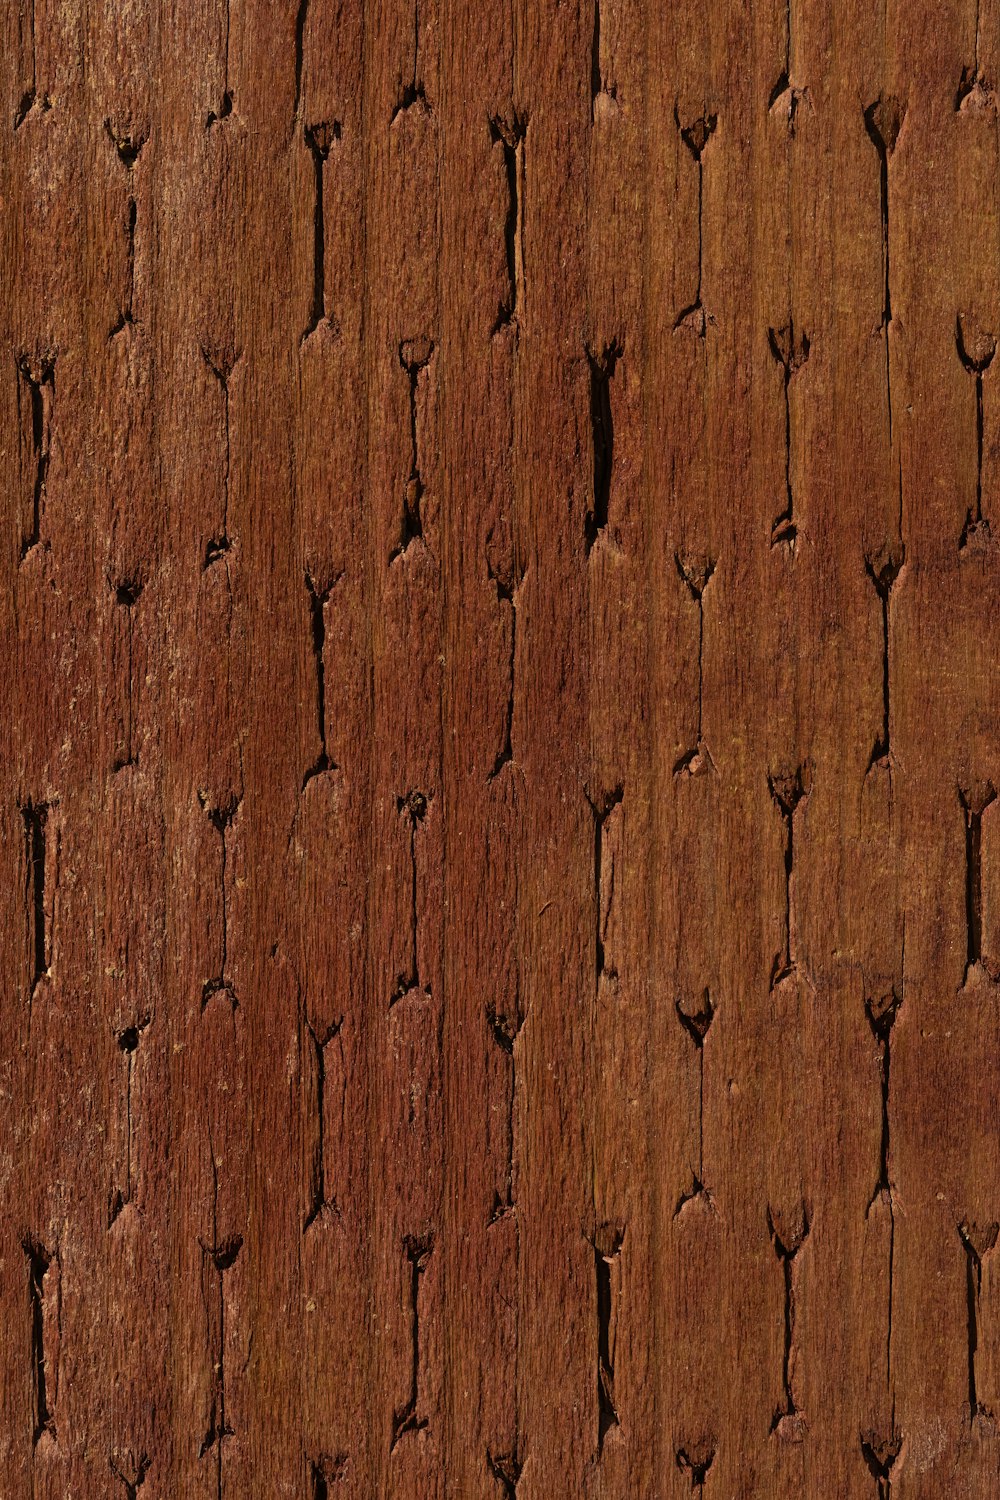 a close up of a wooden surface with small holes